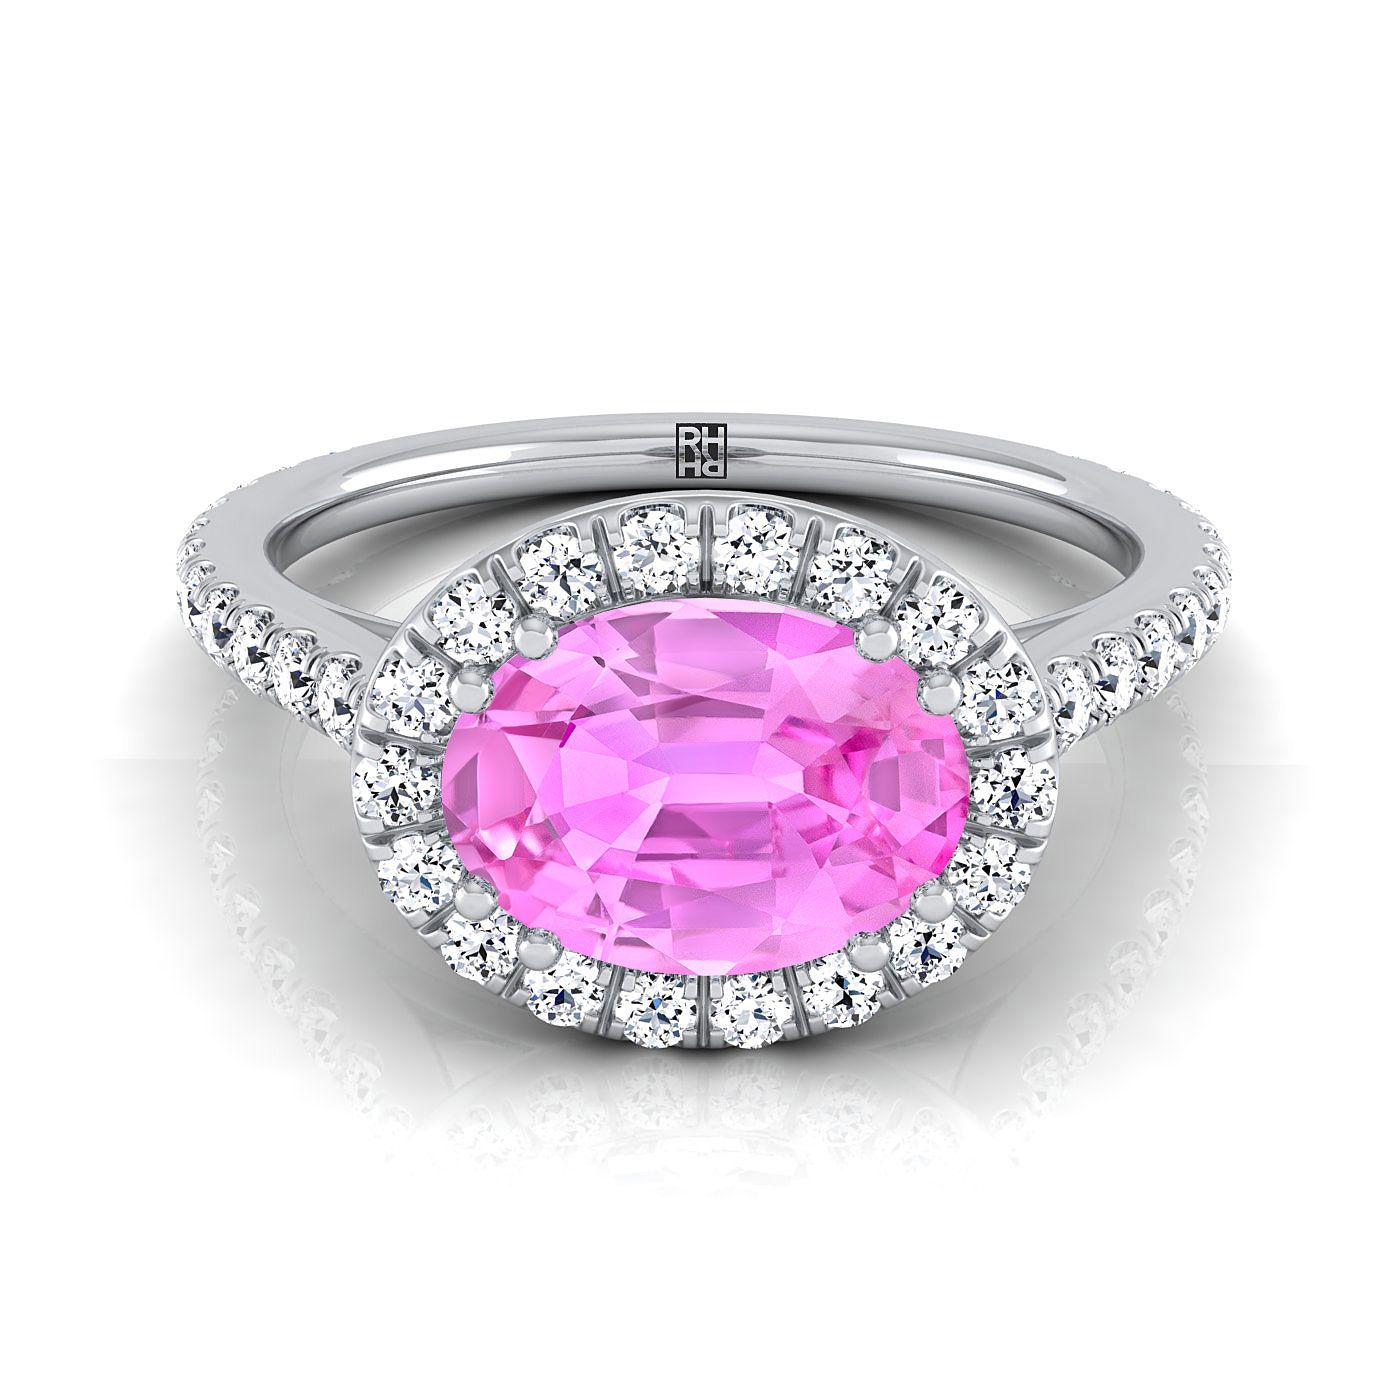 14K White Gold Oval Pink Sapphire Horizontal Fancy East West Diamond Halo Engagement Ring -1/2ctw